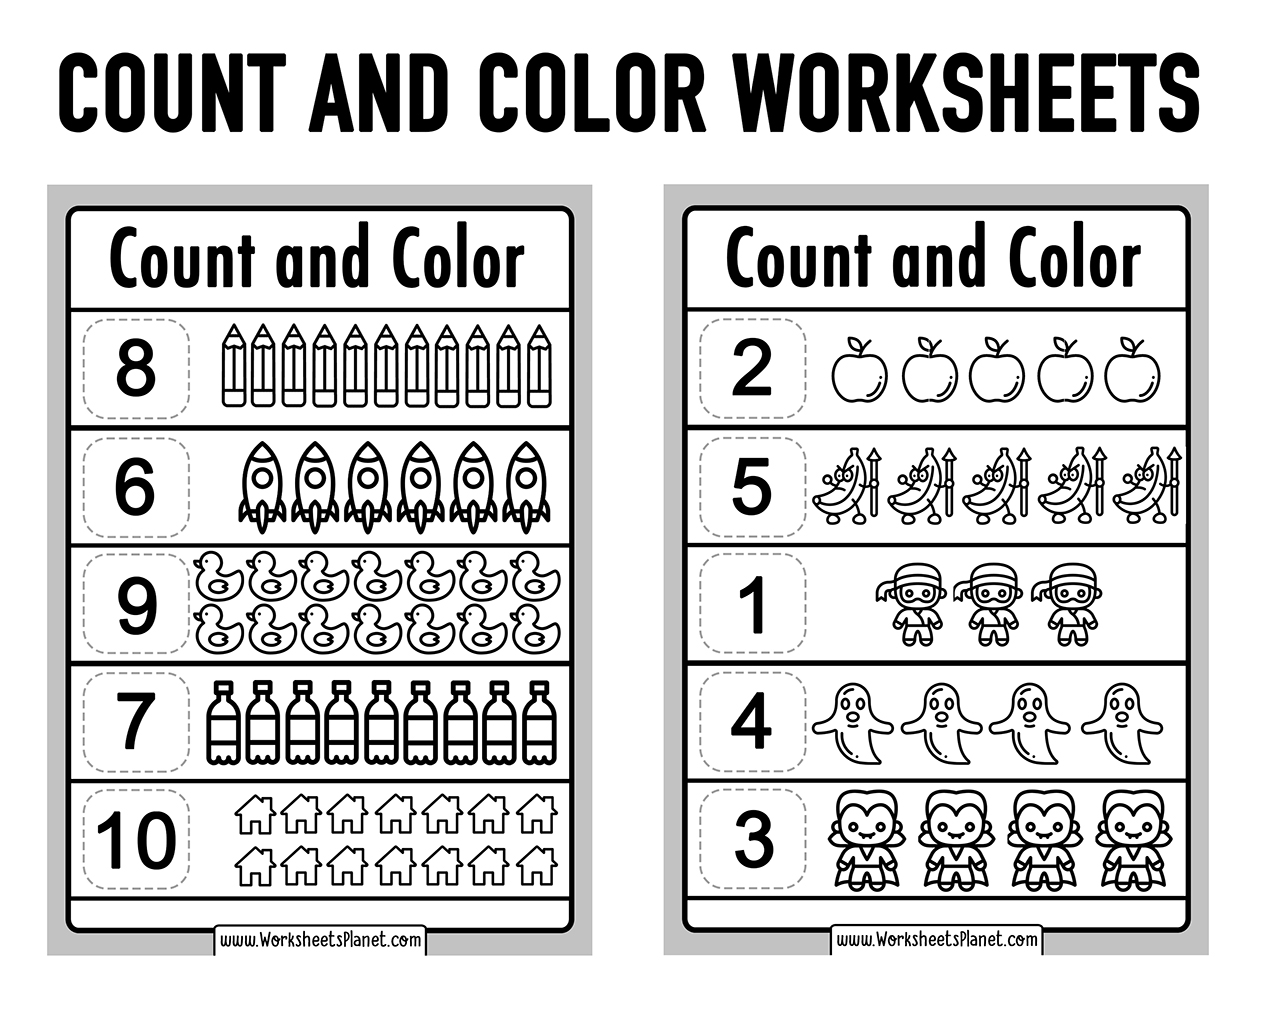 Download Free Color By Number 4 and educational activity worksheets for Kids